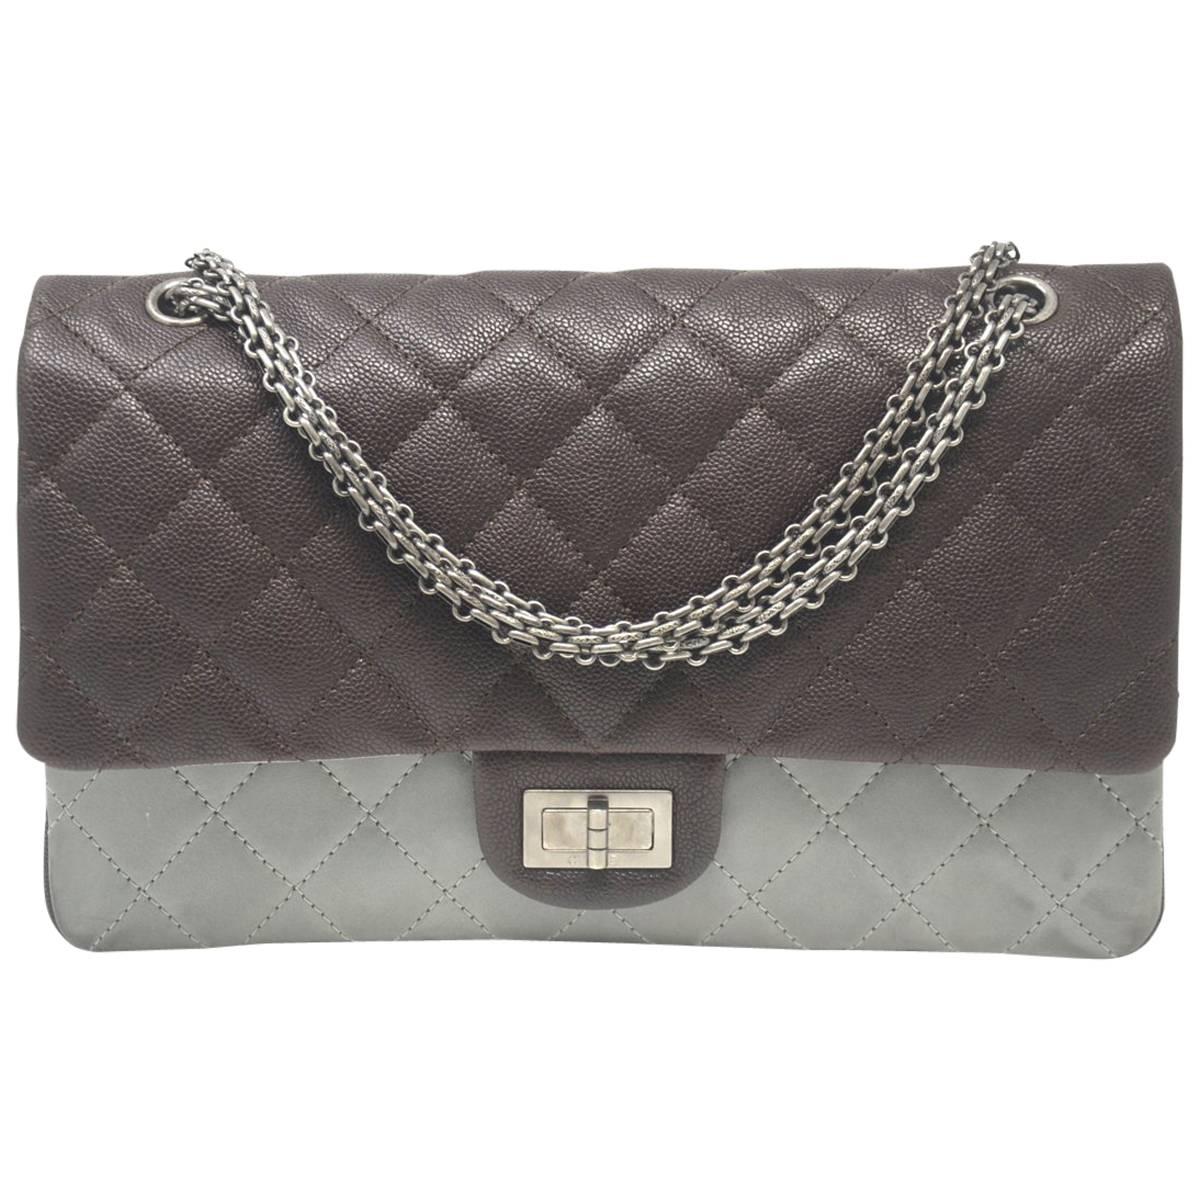 CHANEL Two-Toned Brown/Grey 2.55 Reissue Classic 227 Flap Handbag